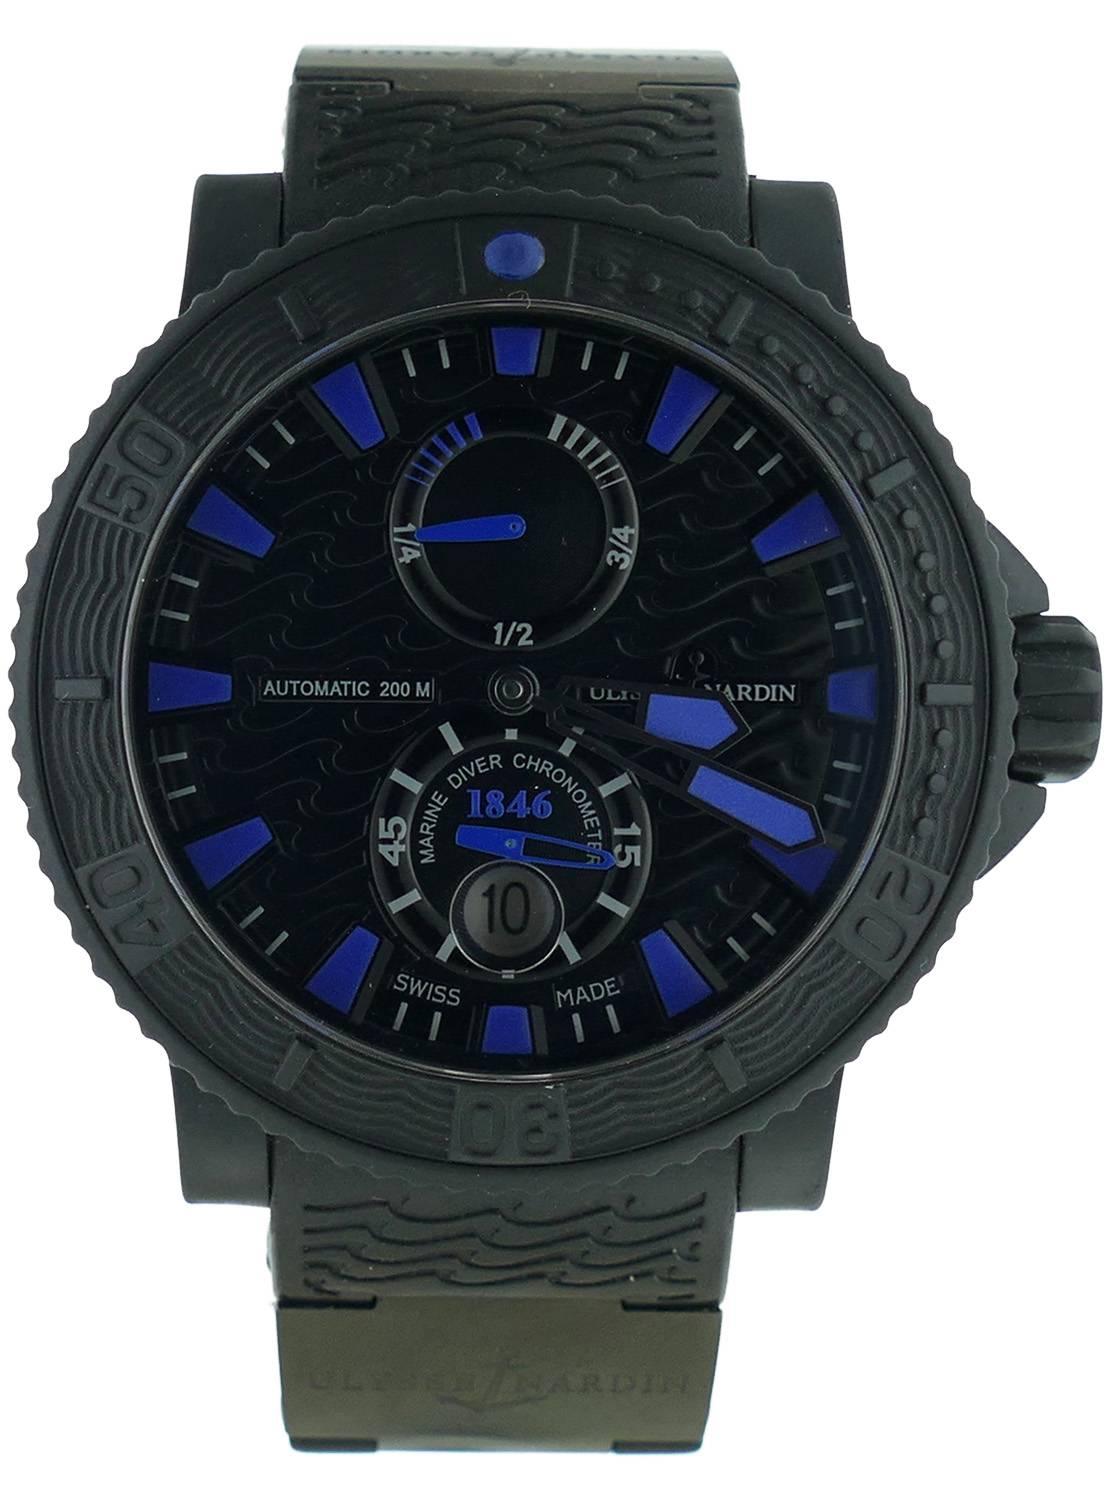 MENS (45mm) ULYSSE NARDIN MAXI MARINE DIVER BLACK SEA WATCH, REF 263-92-3C/923 , Retails $9900. The Watch is in Excellent Condition & Working Perfectly; Movement is Powered by Automatic Mechanical Winding. Included with the Watch are Its Box, Manual